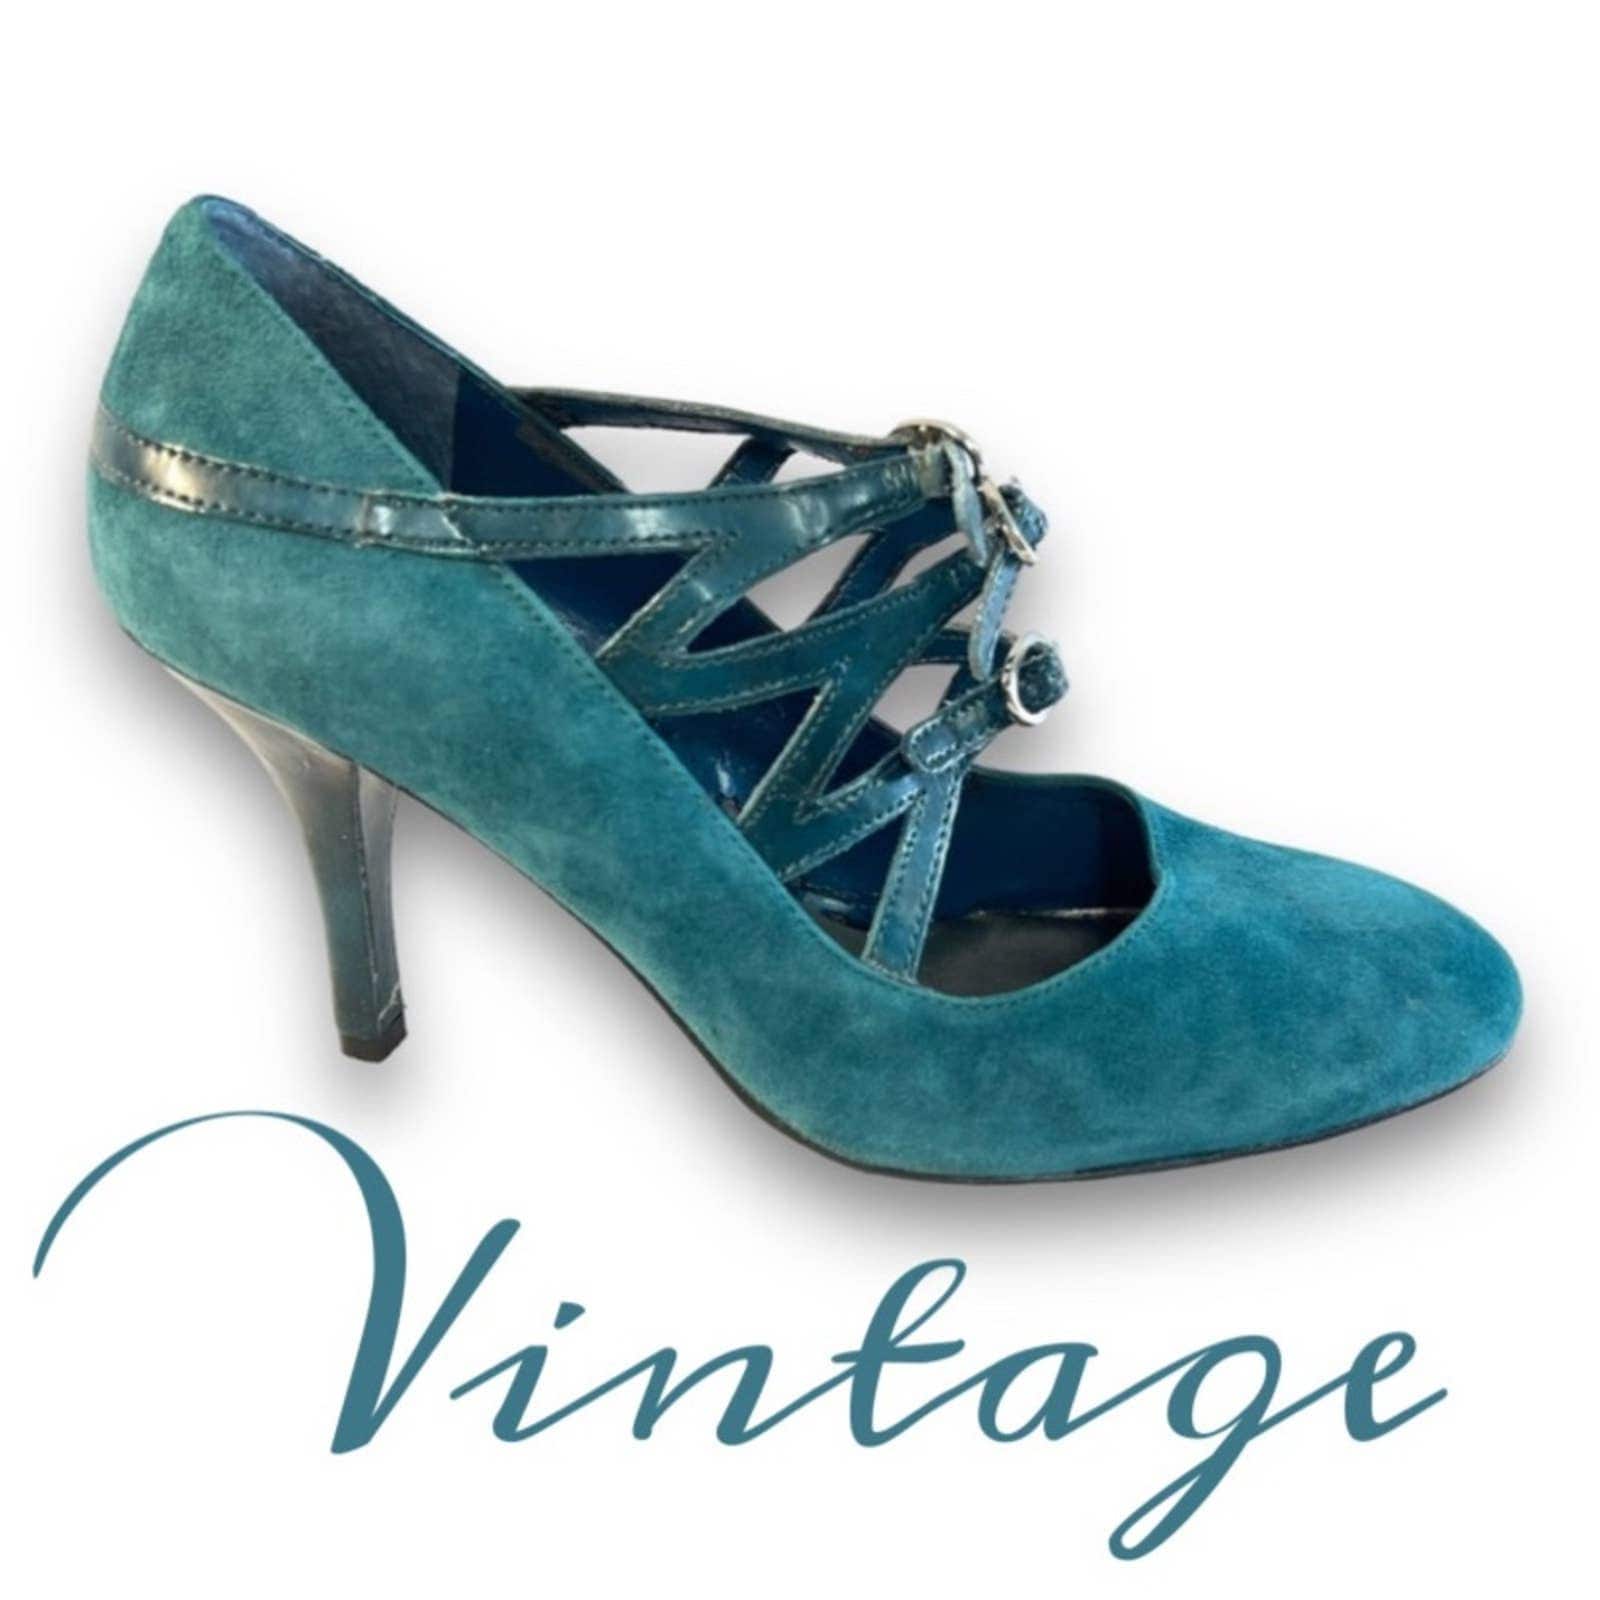 Teal Wedding Shoes PEACOCK Satin Heels, Hand Embellished Teal Shoes Organza  Flowers & Beads Slingback, Open Peep Toe, Accessory - Etsy | Teal shoes,  Whimsical shoes, Teal wedding shoes